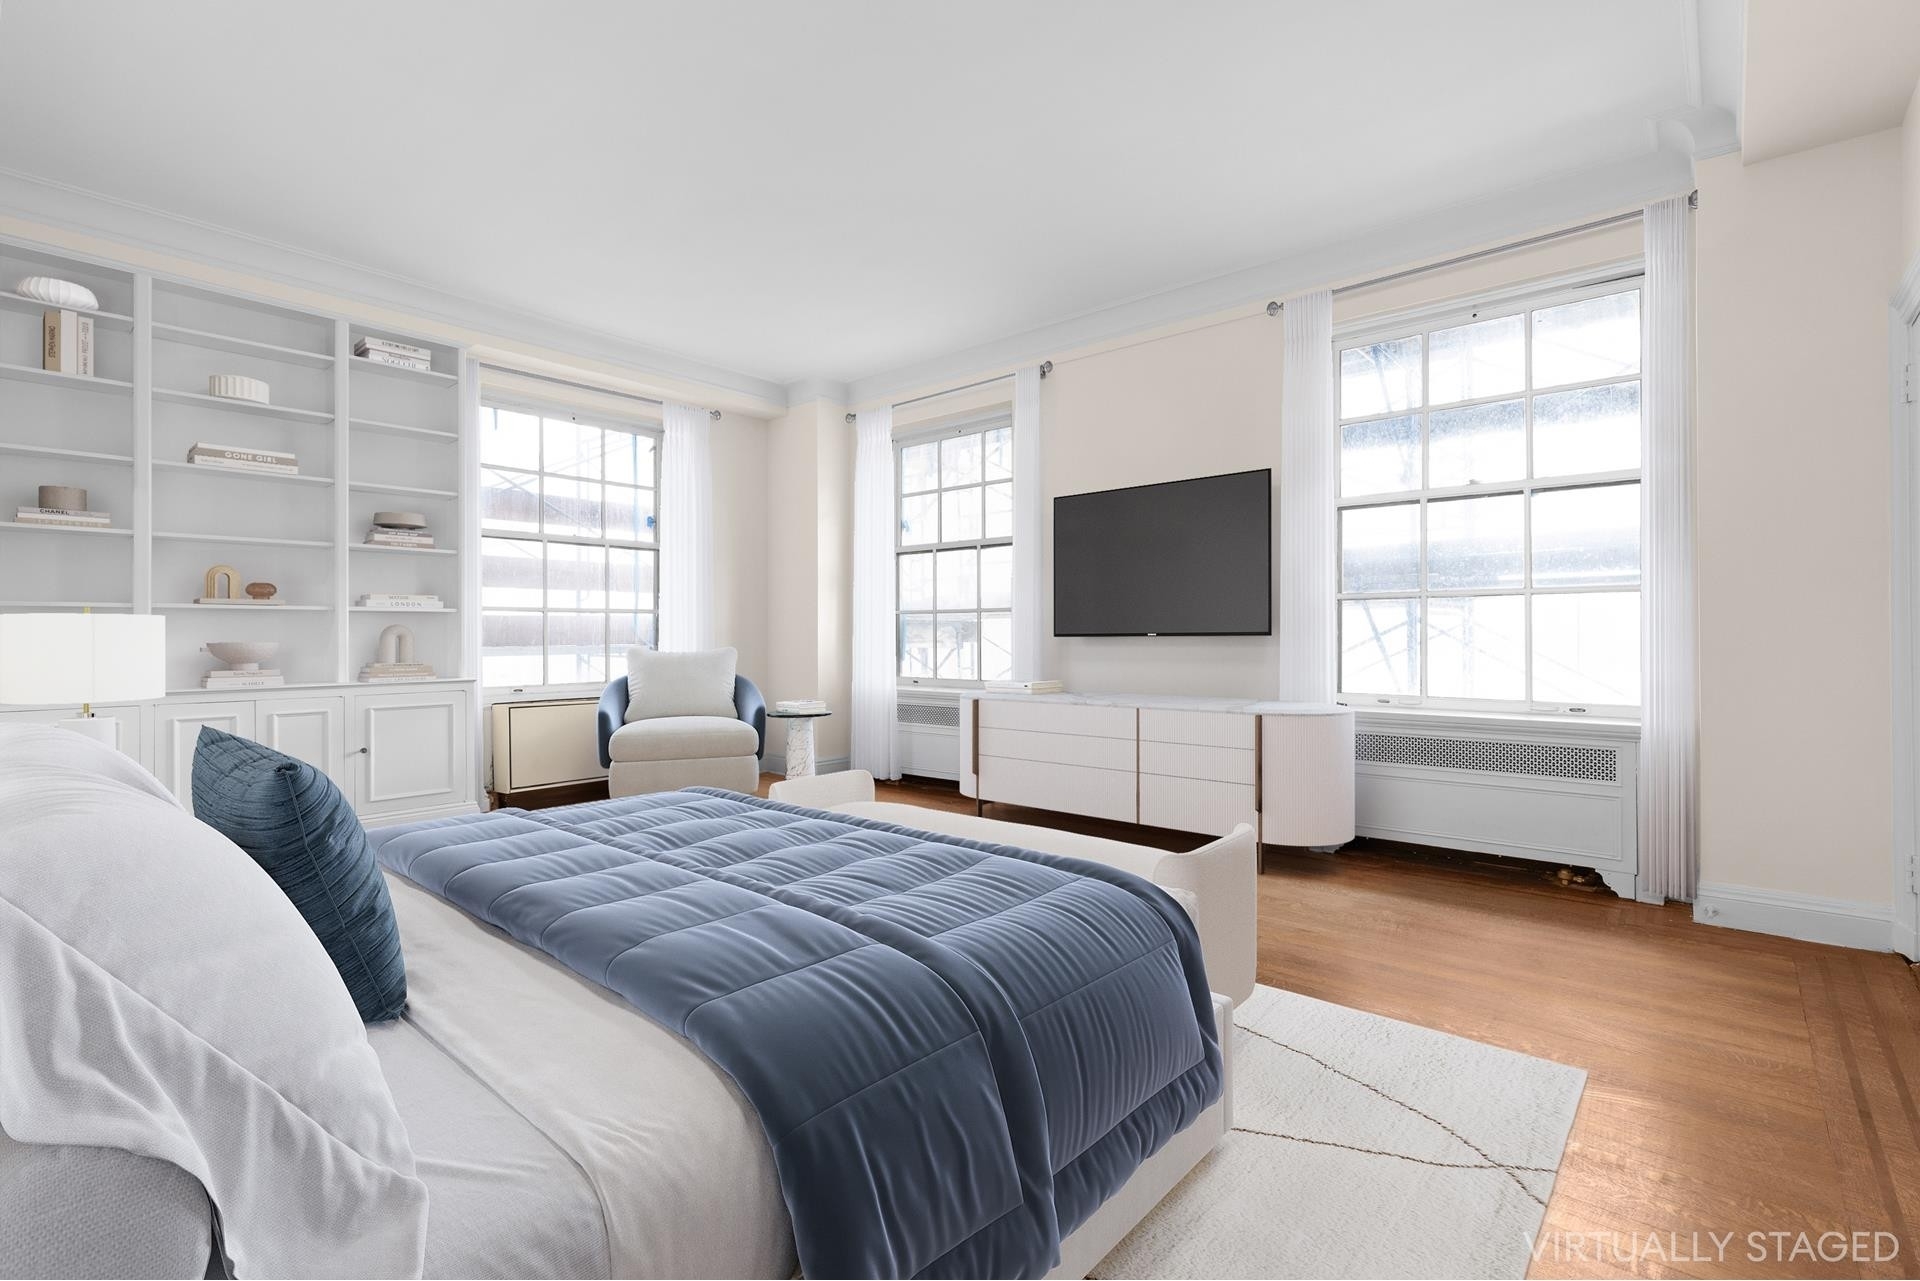 19. Co-op Properties for Sale at RIVER HOUSE, 435 E 52ND ST, 13B Beekman, New York, NY 10022